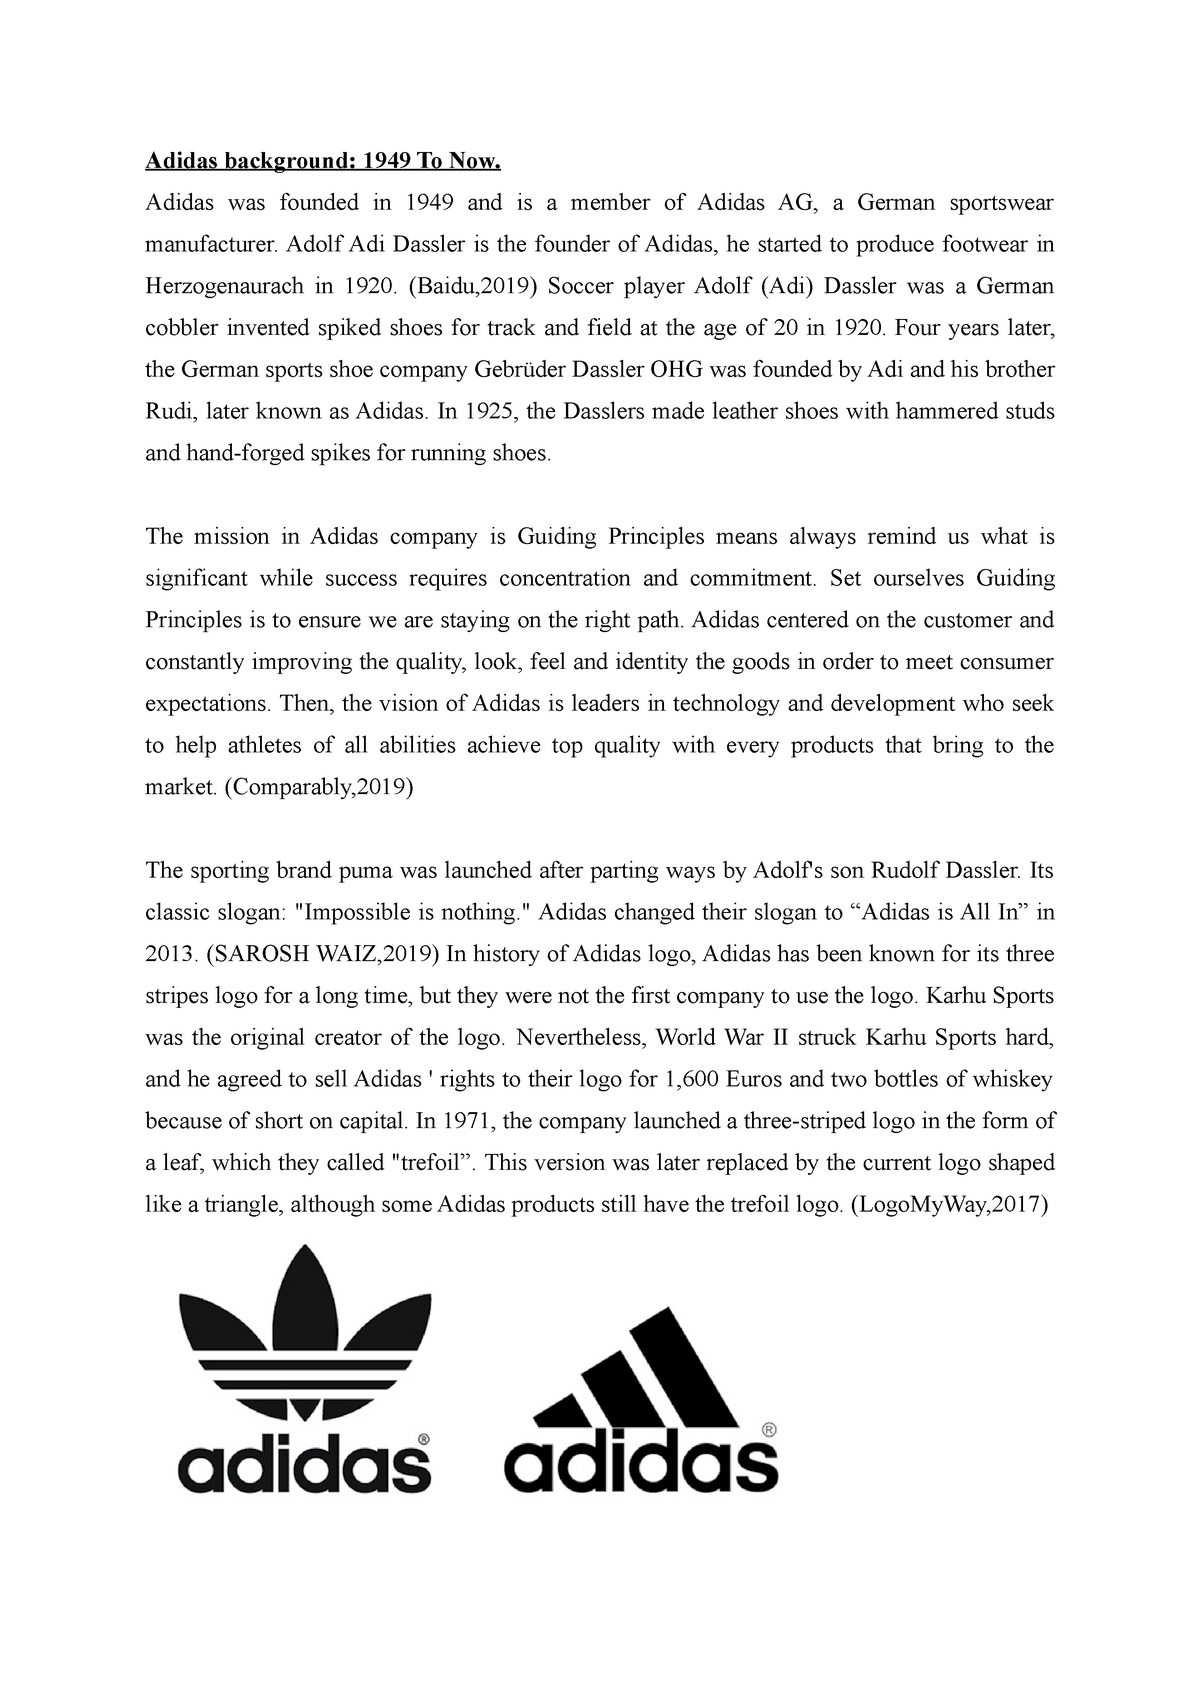 Adidas - Adidas was founded 1949 and is a of Adidas AG, a sportswear - Studocu